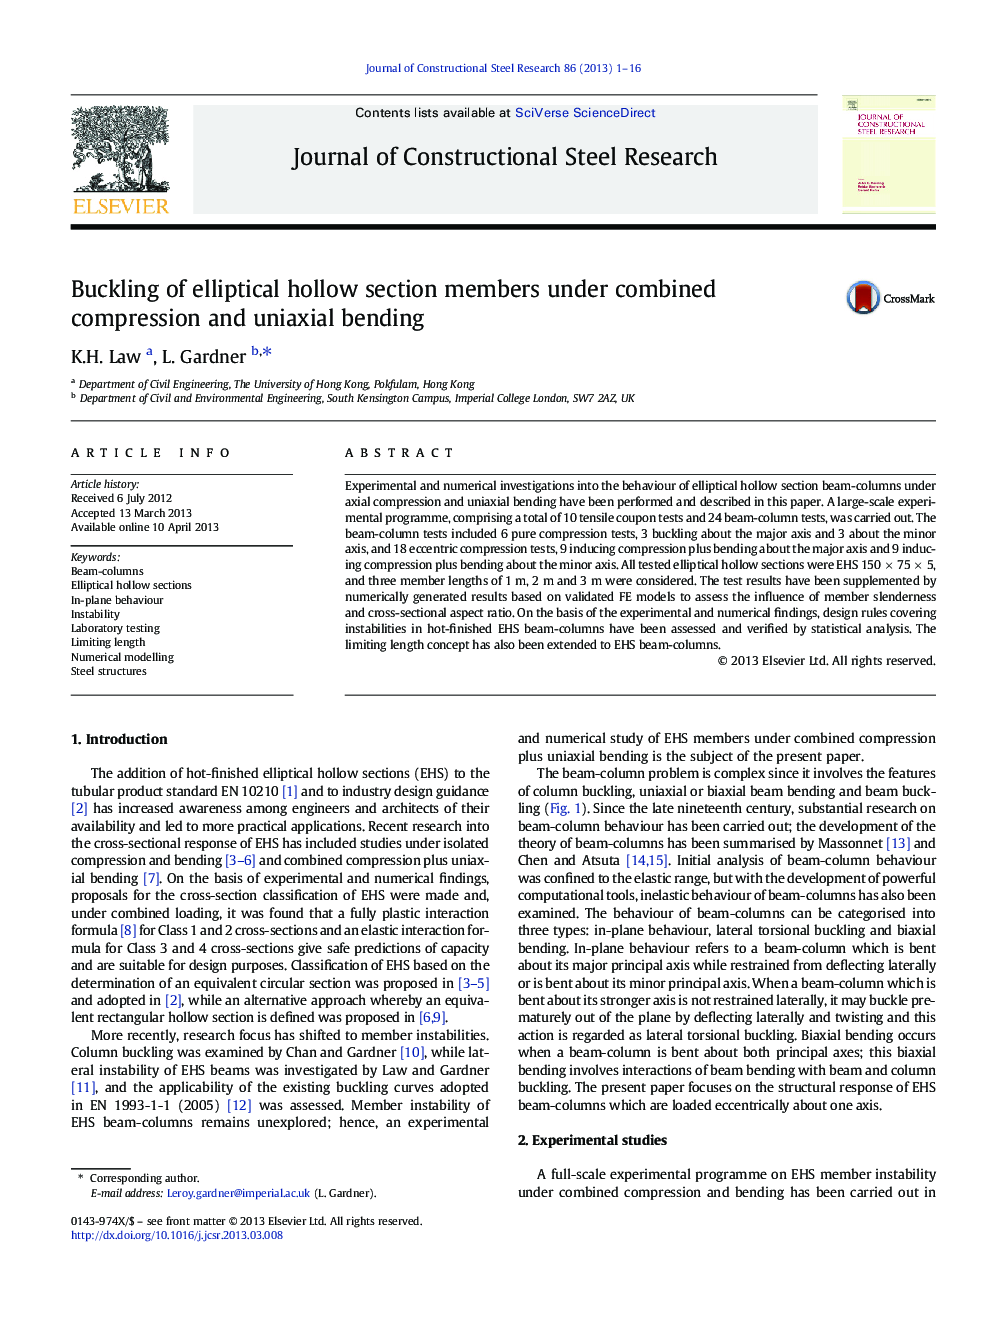 Buckling of elliptical hollow section members under combined compression and uniaxial bending